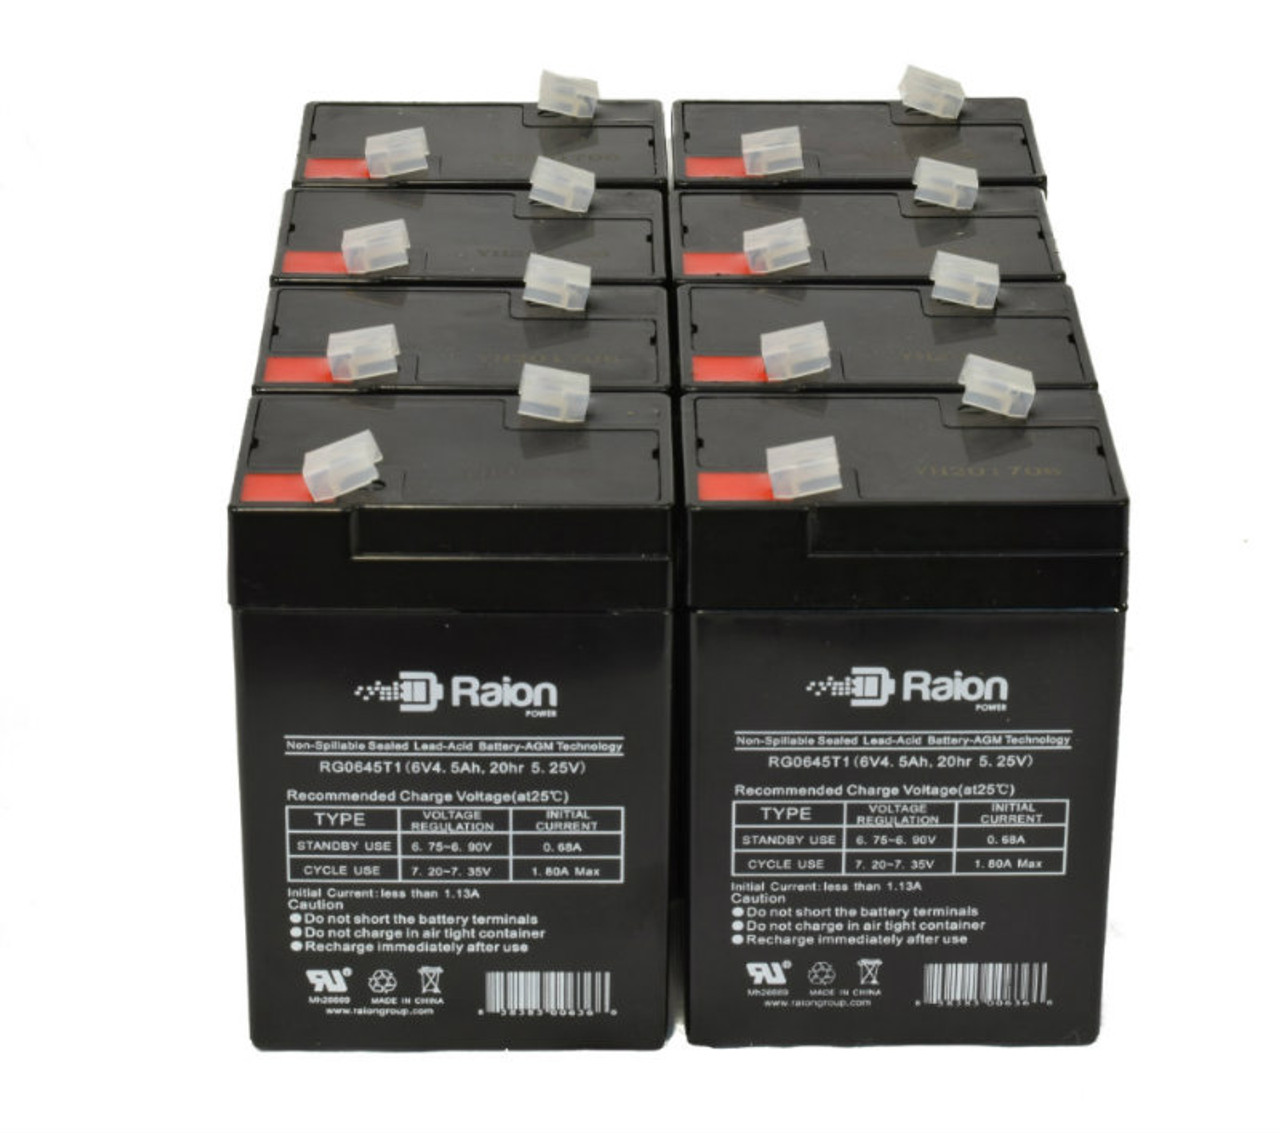 Raion Power 6V 4.5Ah Replacement Emergency Light Battery for Expocell P206-50 - 8 Pack